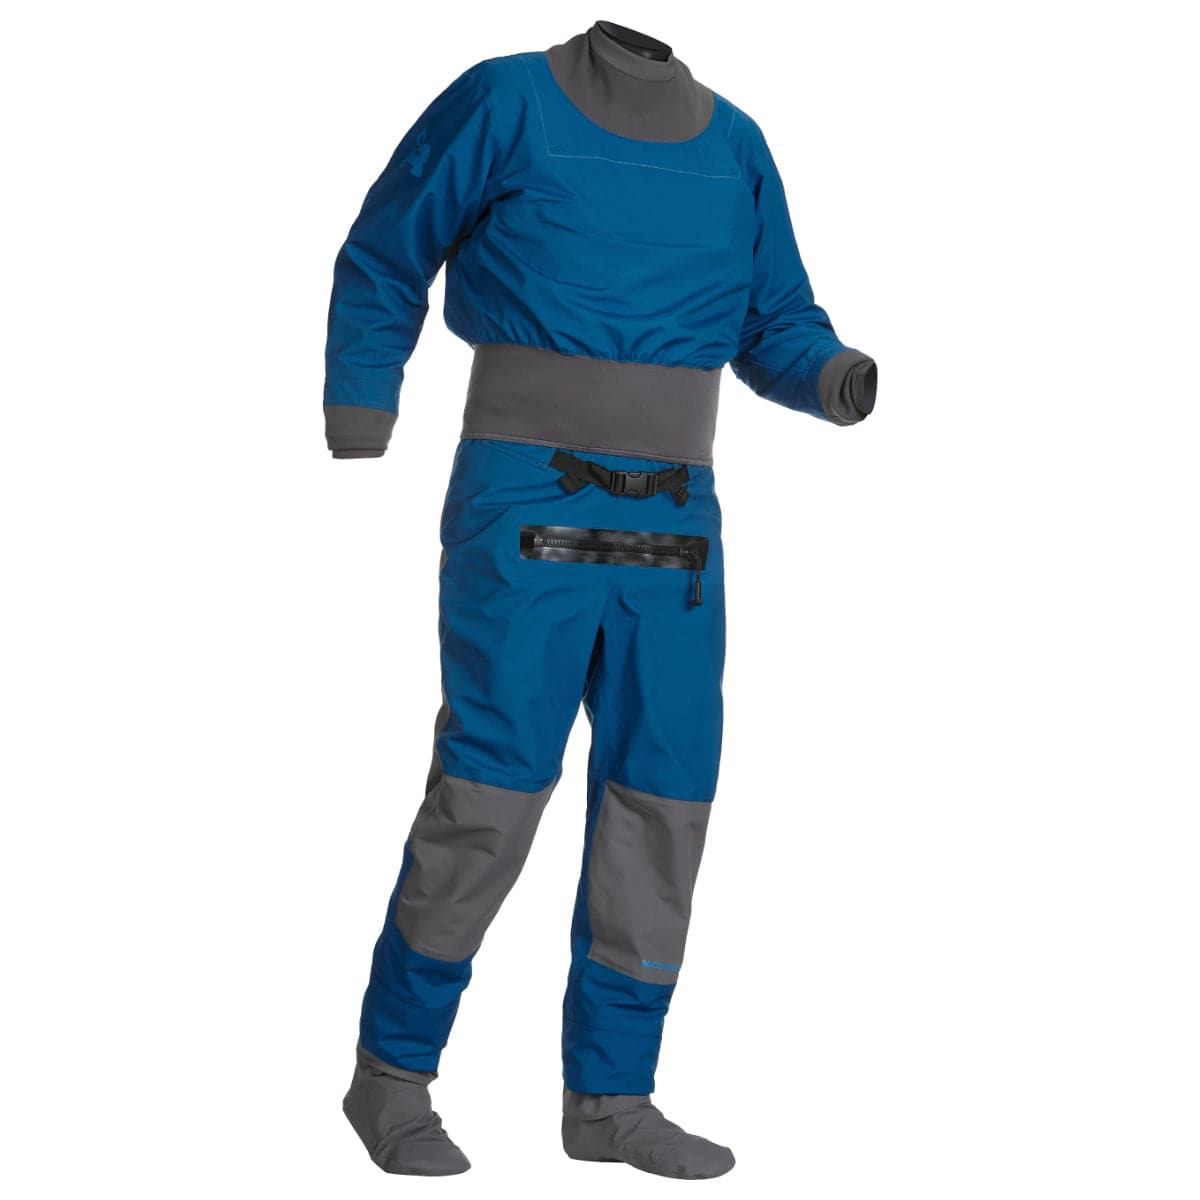 Featuring the 7Figure Drysuit drysuit, drysuits, men's dry wear manufactured by Immersion Research shown here from a third angle.